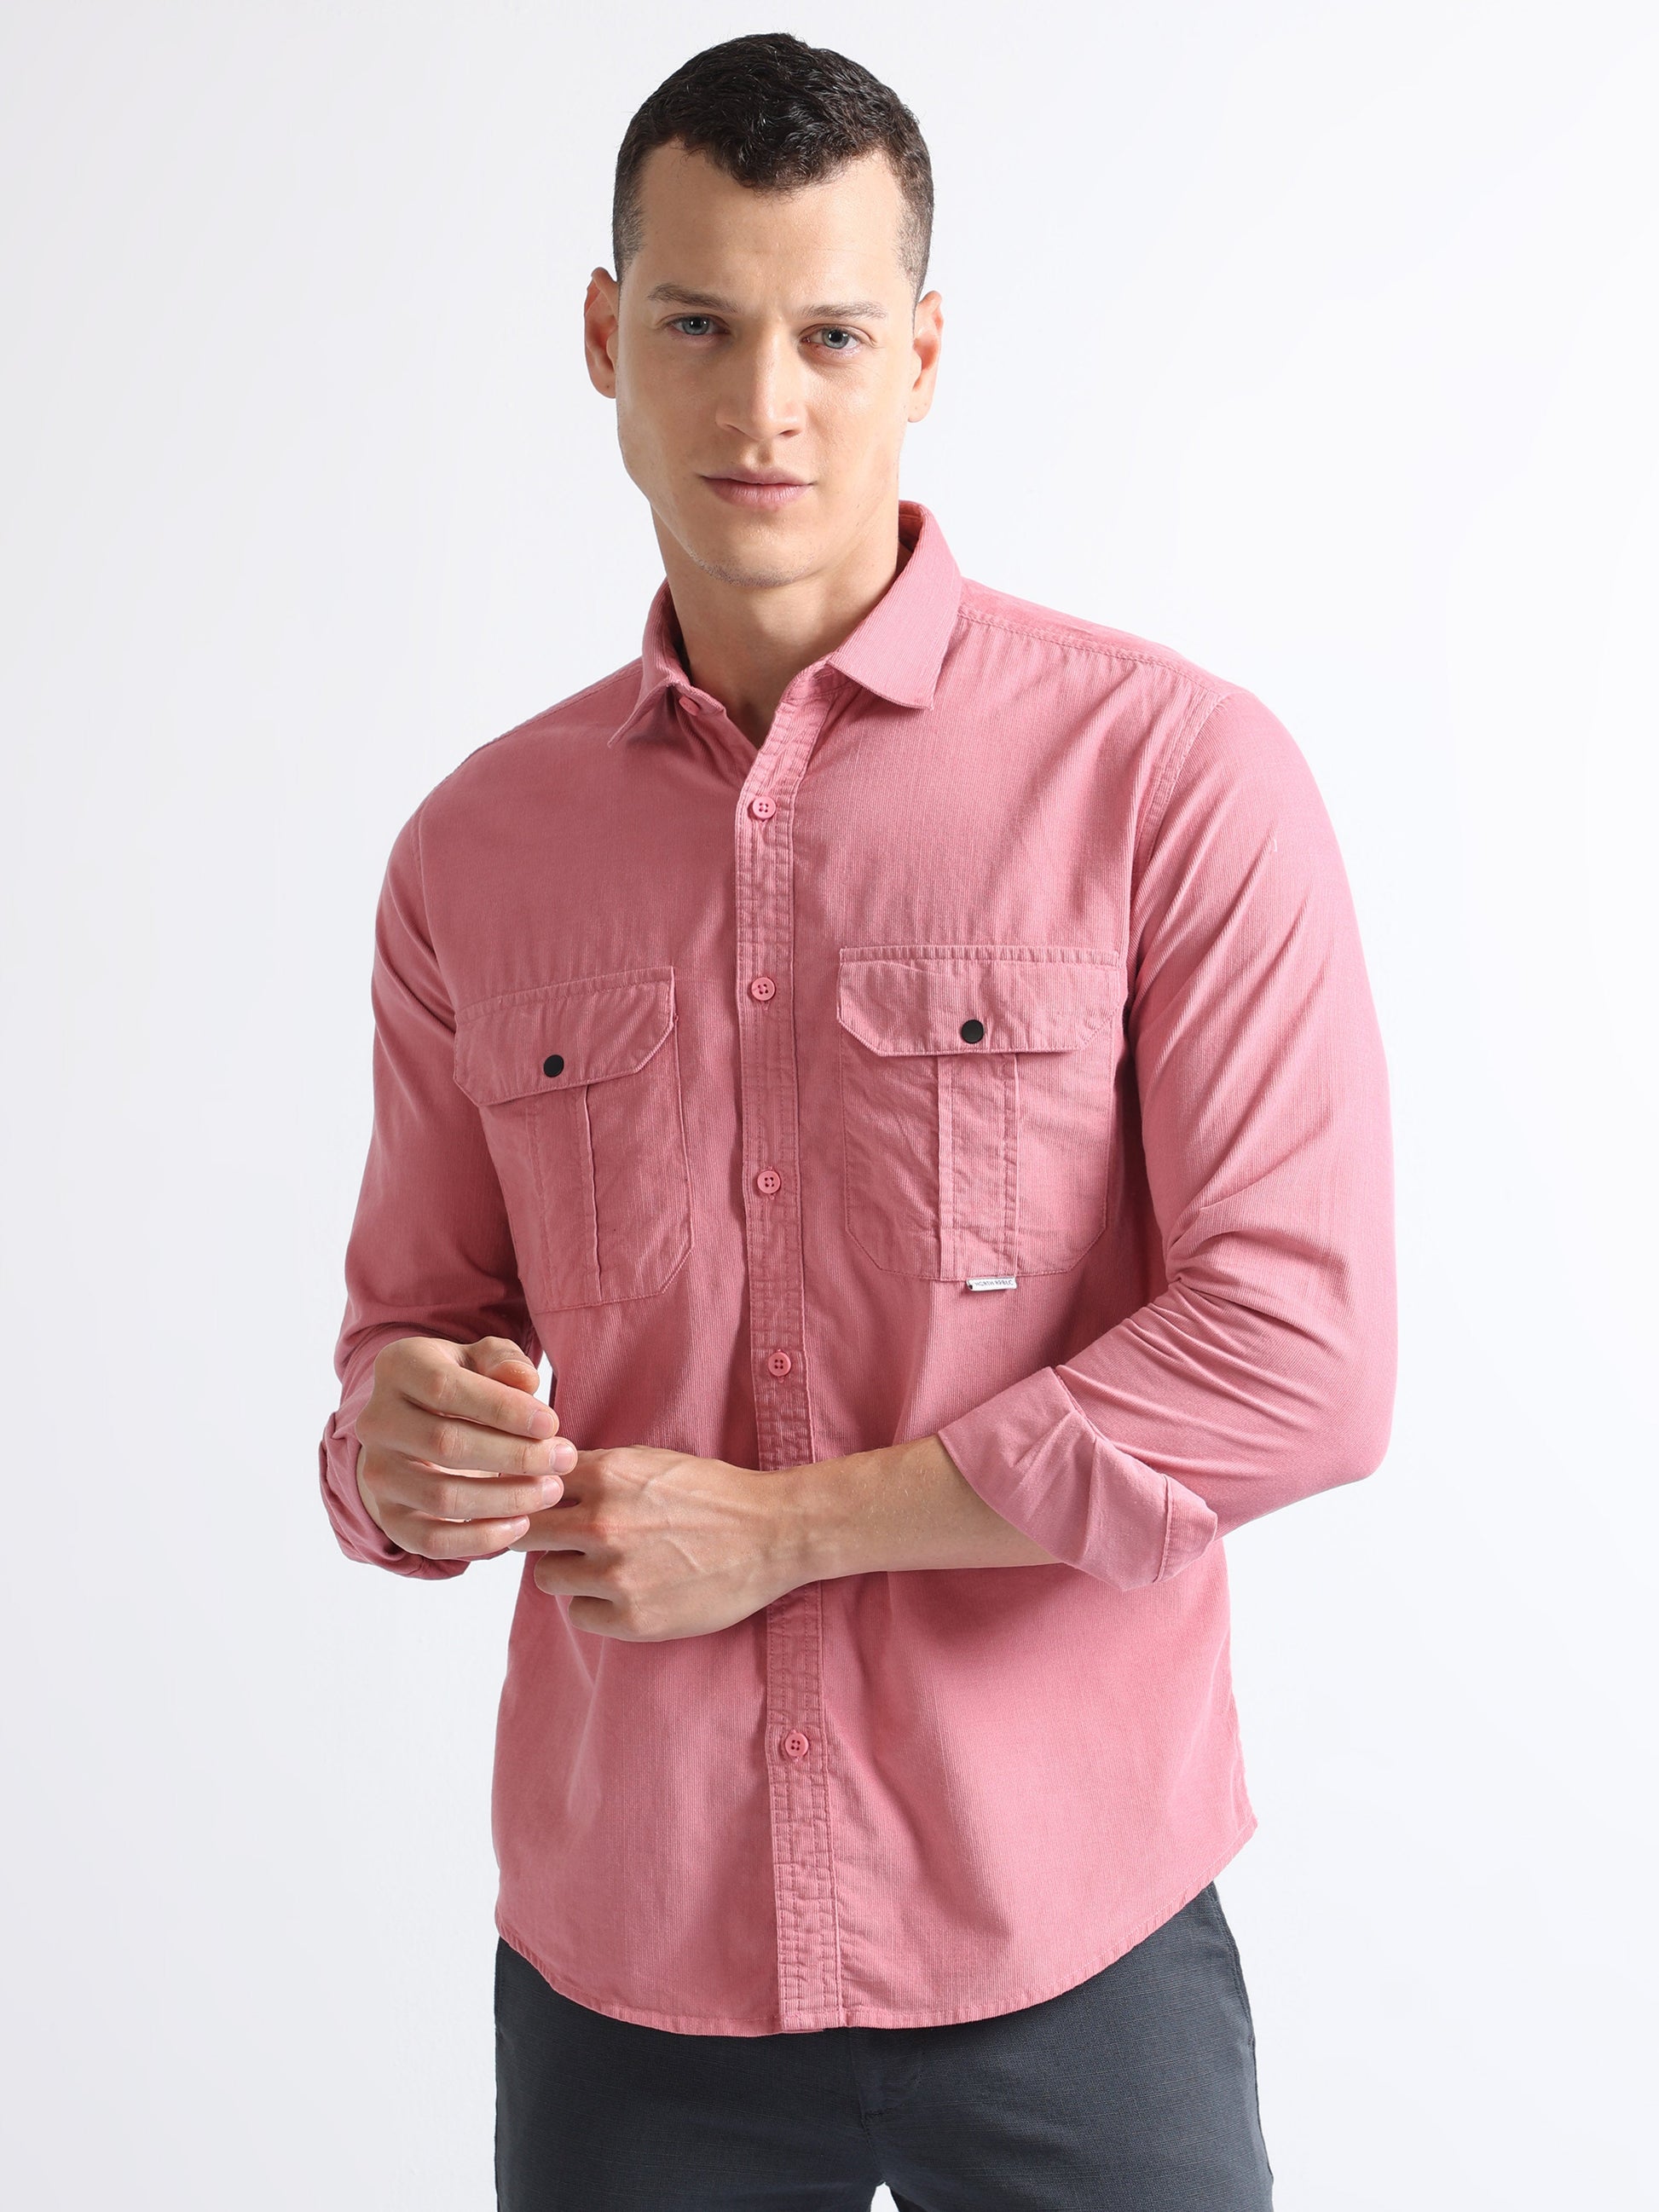 Buy Snap Button Double Pocket Shirt For Mens Online.